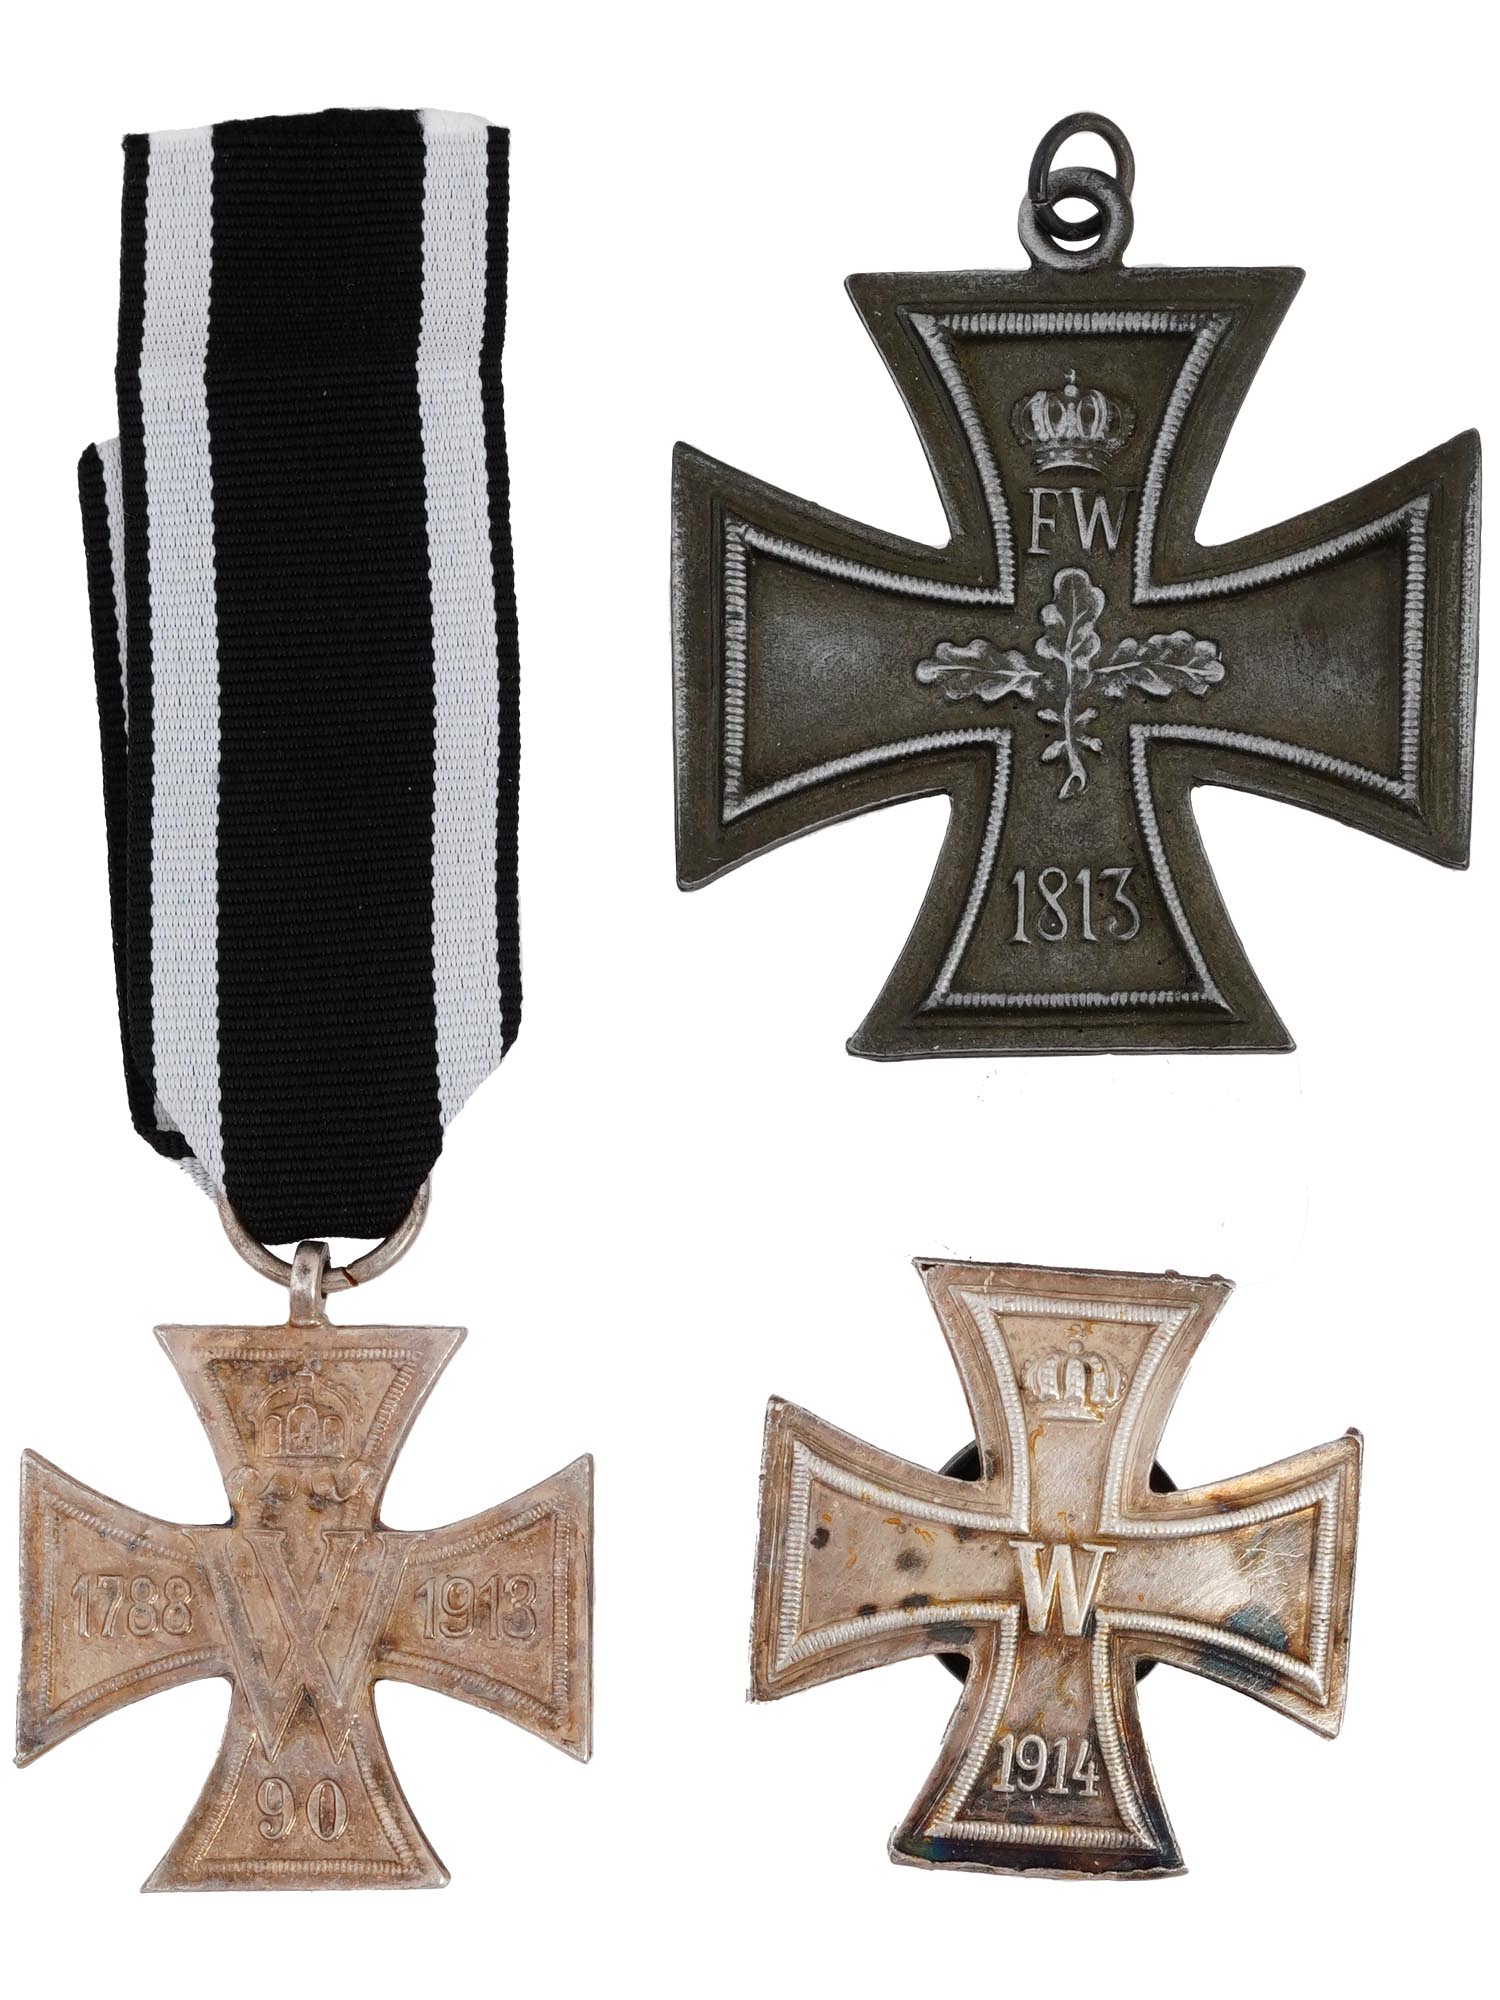 WWI GERMAN MILITARY CROSS BADGES 1913 AND 1914 PIC-0